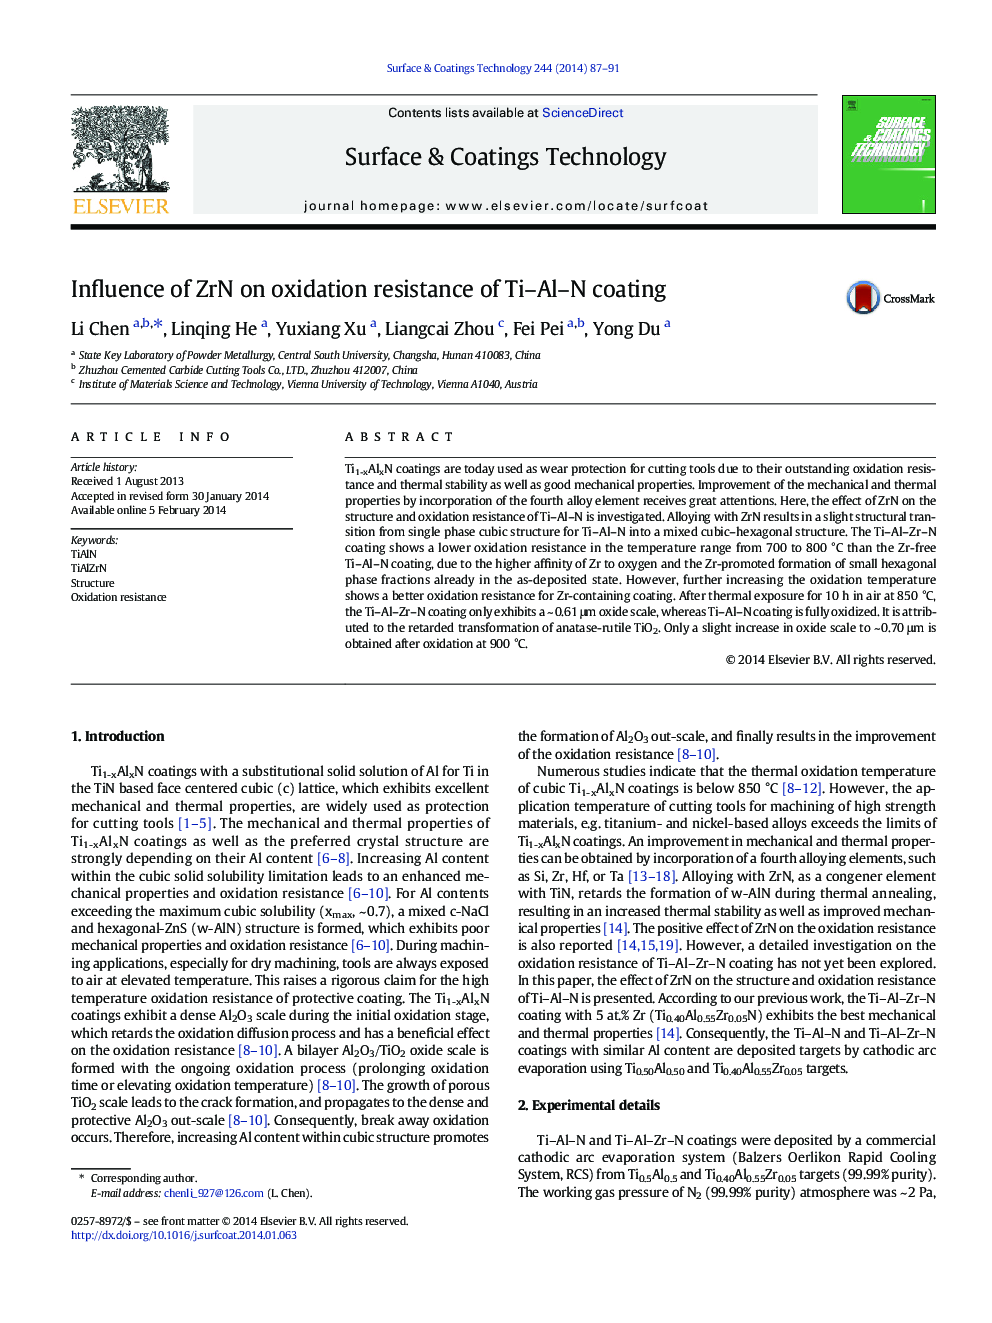 Influence of ZrN on oxidation resistance of Ti-Al-N coating